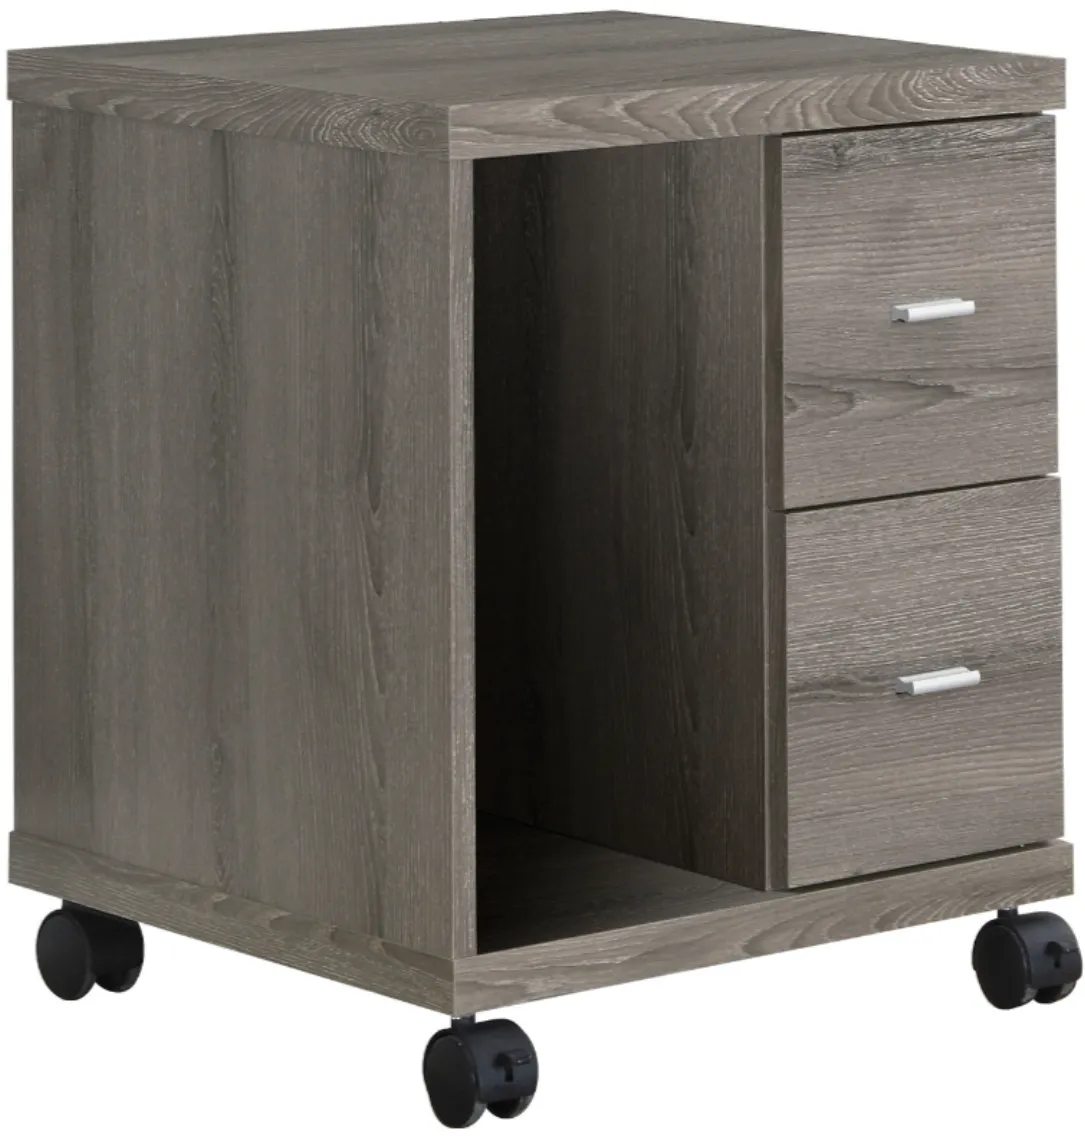 Office, File Cabinet, Printer Cart, Rolling File Cabinet, Mobile, Storage, Work, Laminate, Brown, Contemporary, Modern